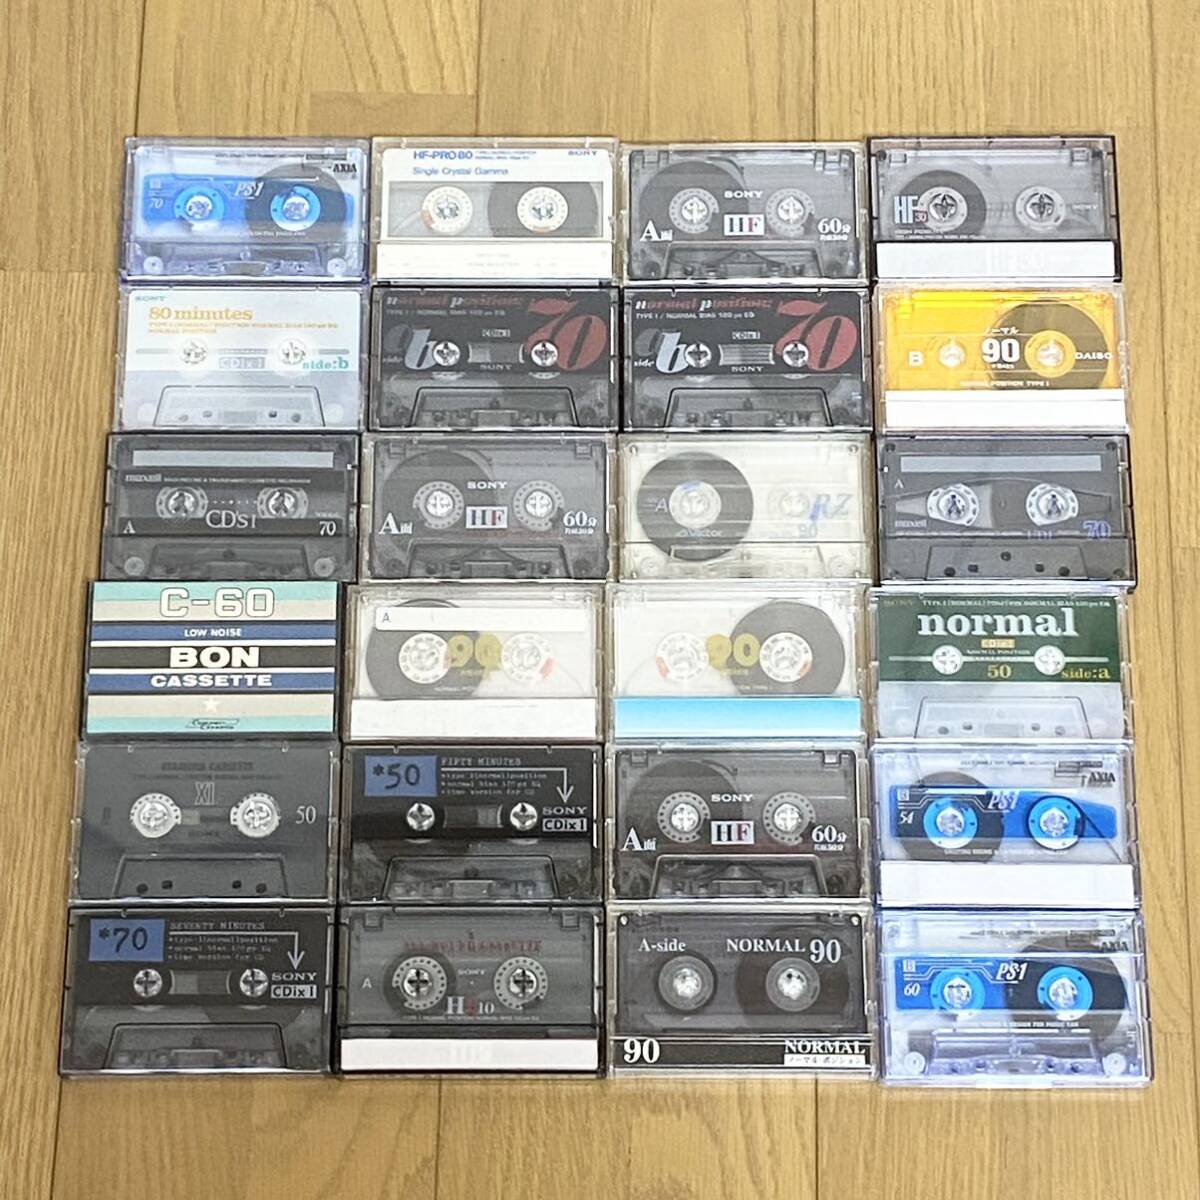  cassette tape recording ending used . large amount together 14 2 ps mak cell AXIA SONY other 